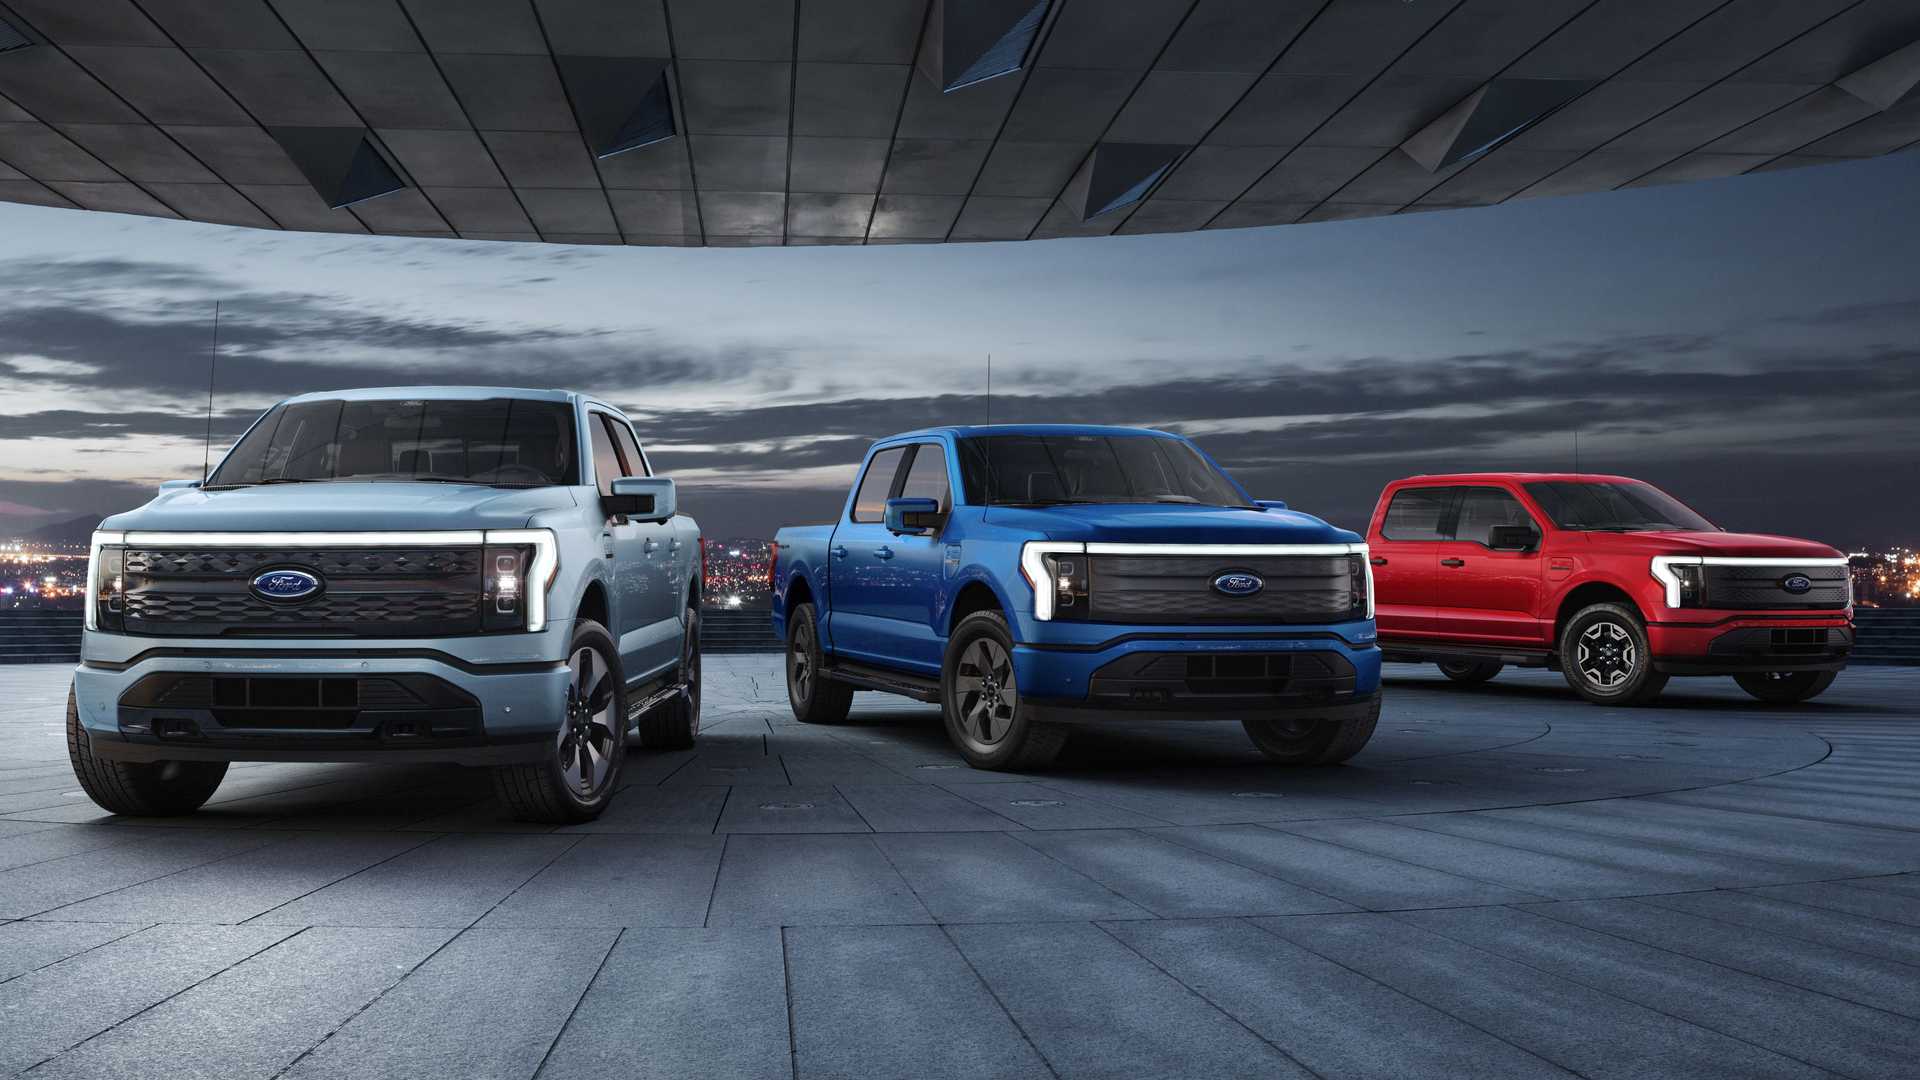 Three 2022 F-150 Lightning in red, blue and grey on a road